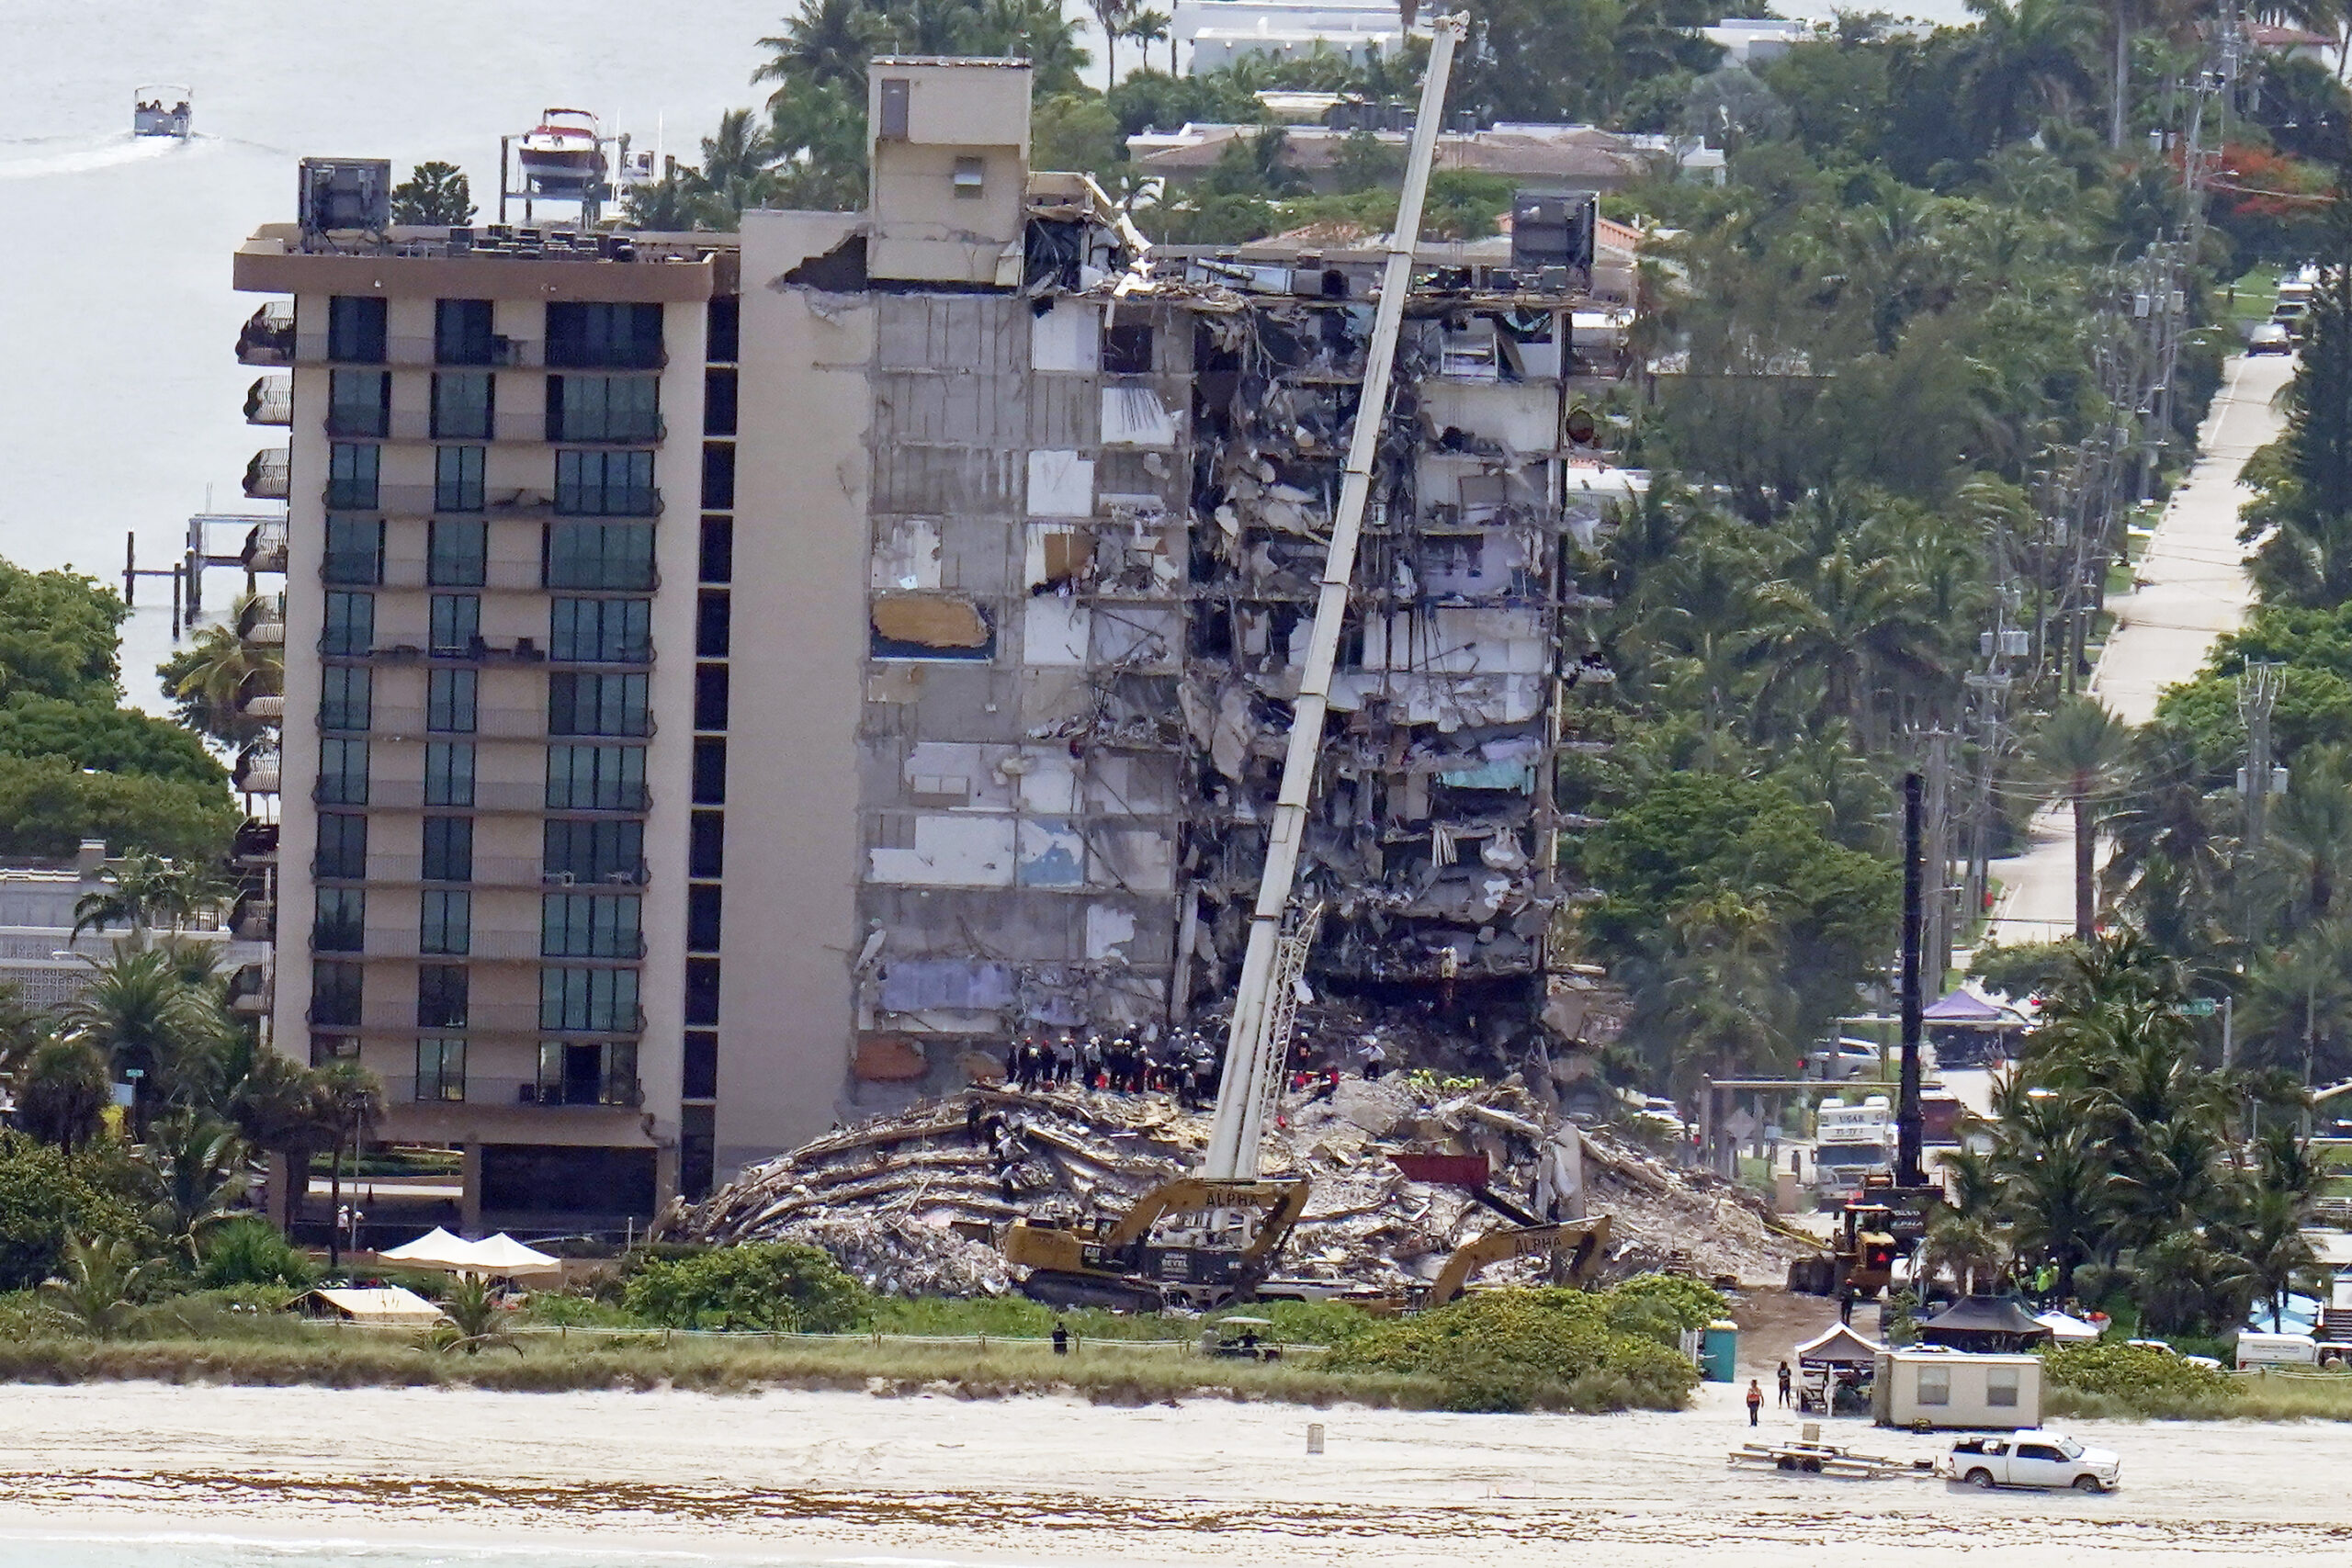 Workers search in the rubble at the Champlain Towers South Condo, Saturday, June 26, 2021, in Surfside, Fla. One hundred fifty-nine people were still unaccounted for two days after Thursday's collapse, which killed at least four. (AP Photo/Gerald Herbert)